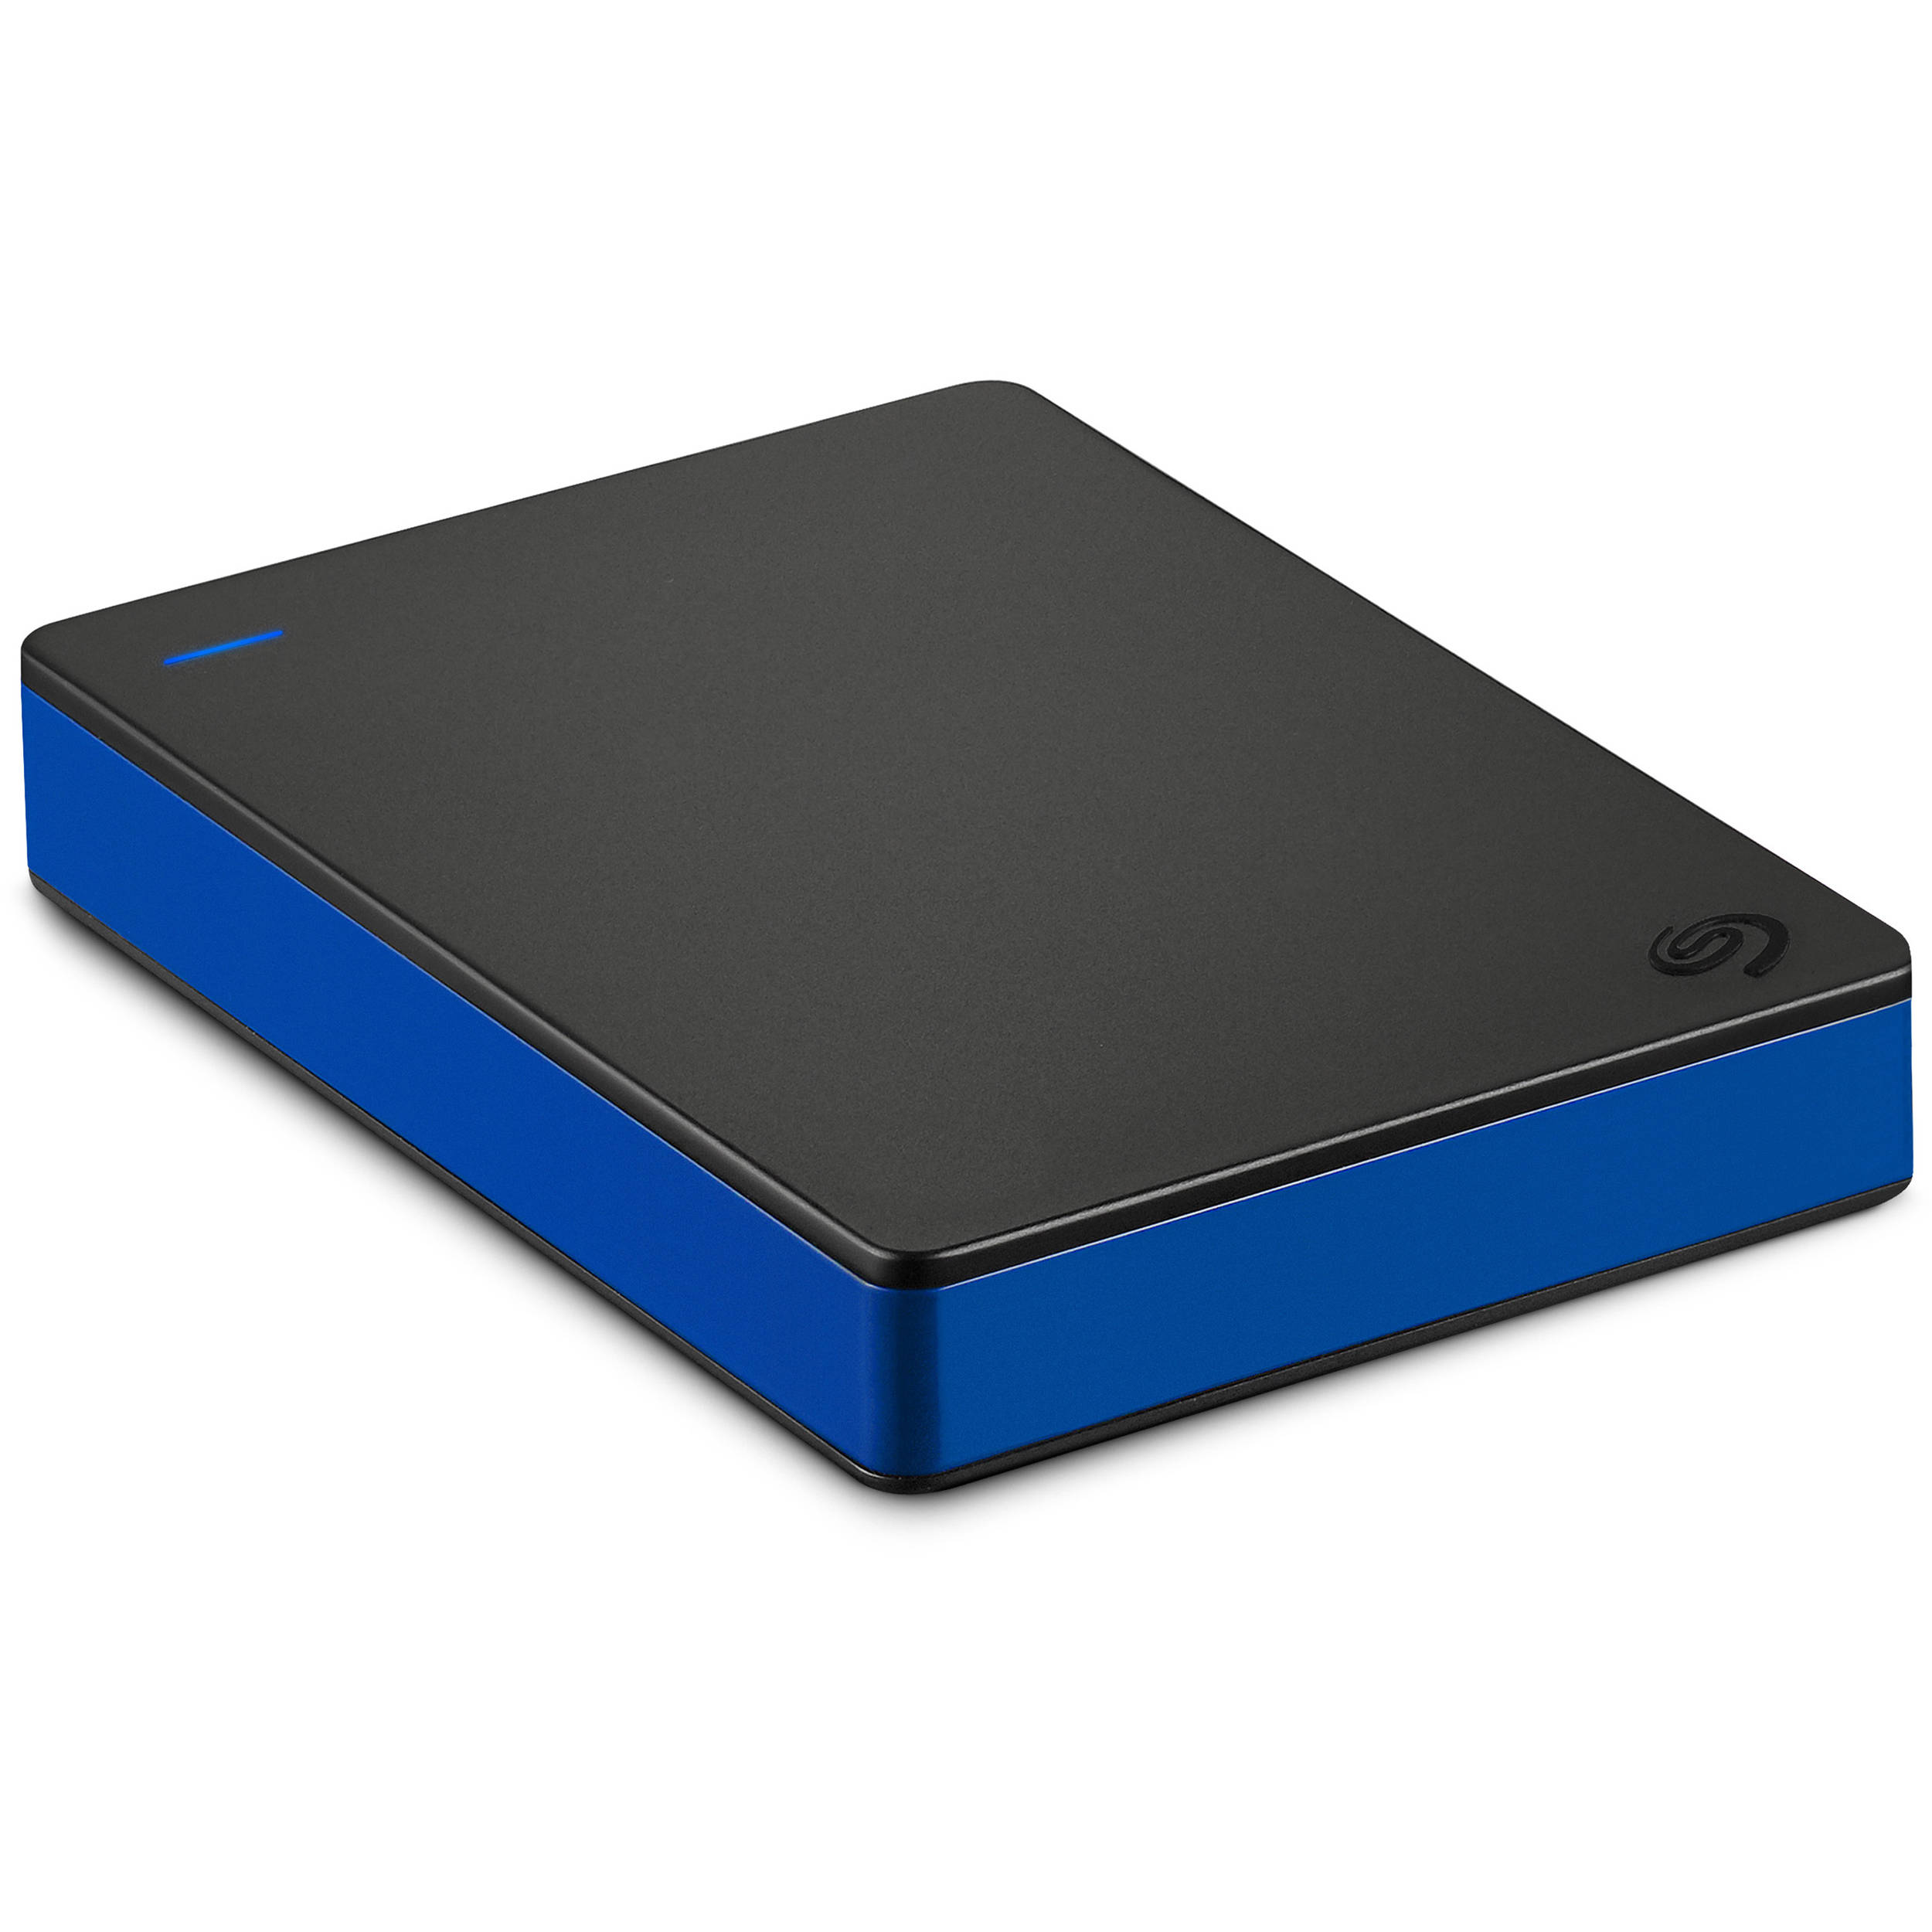 seagate 4tb game drive for playstation 4 portable external usb hard drive